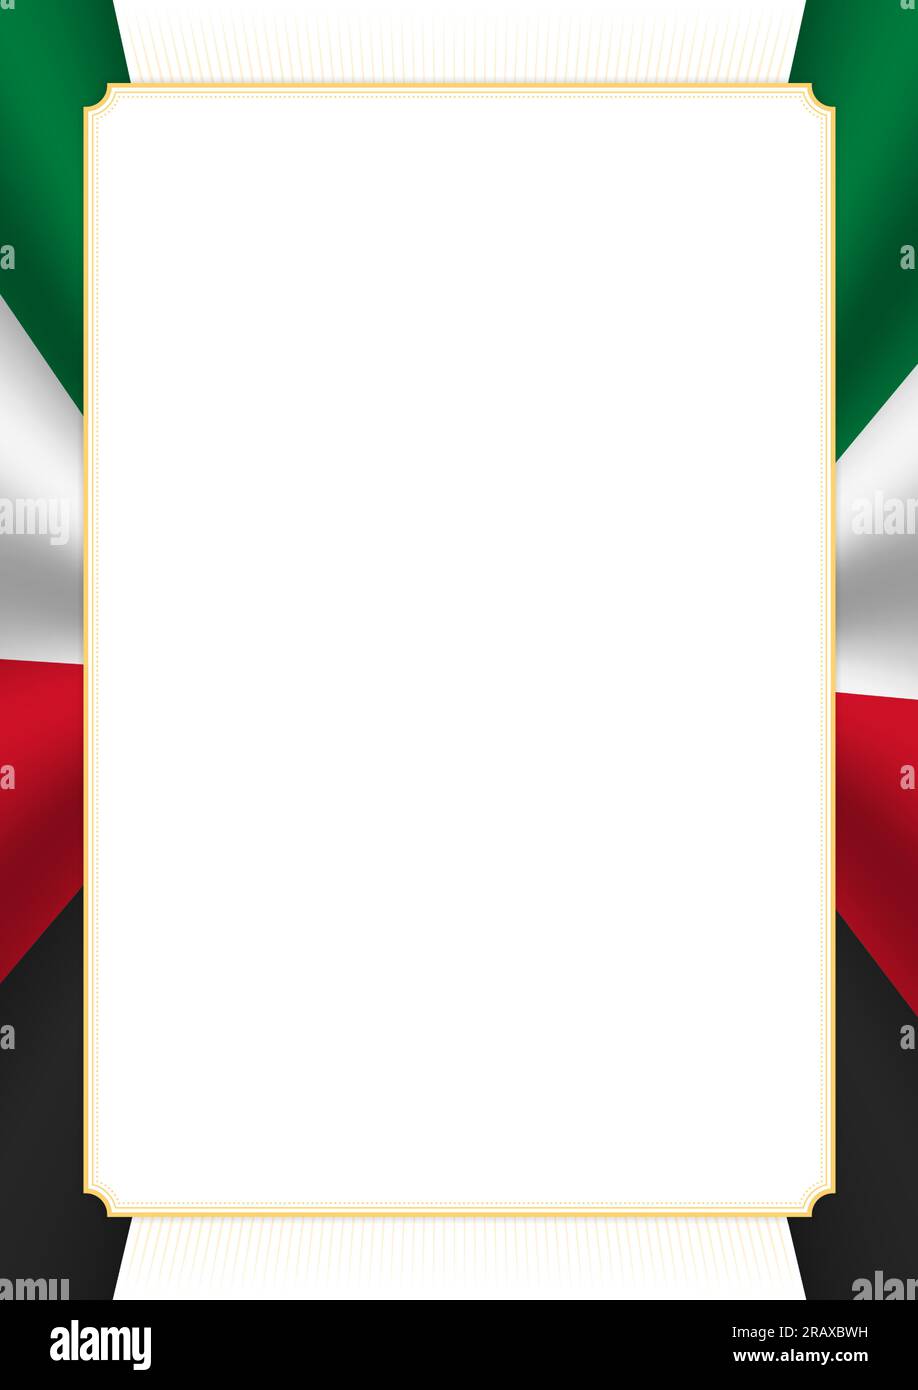 Vertical frame and border with colors of Kuwait flag, template elements ...